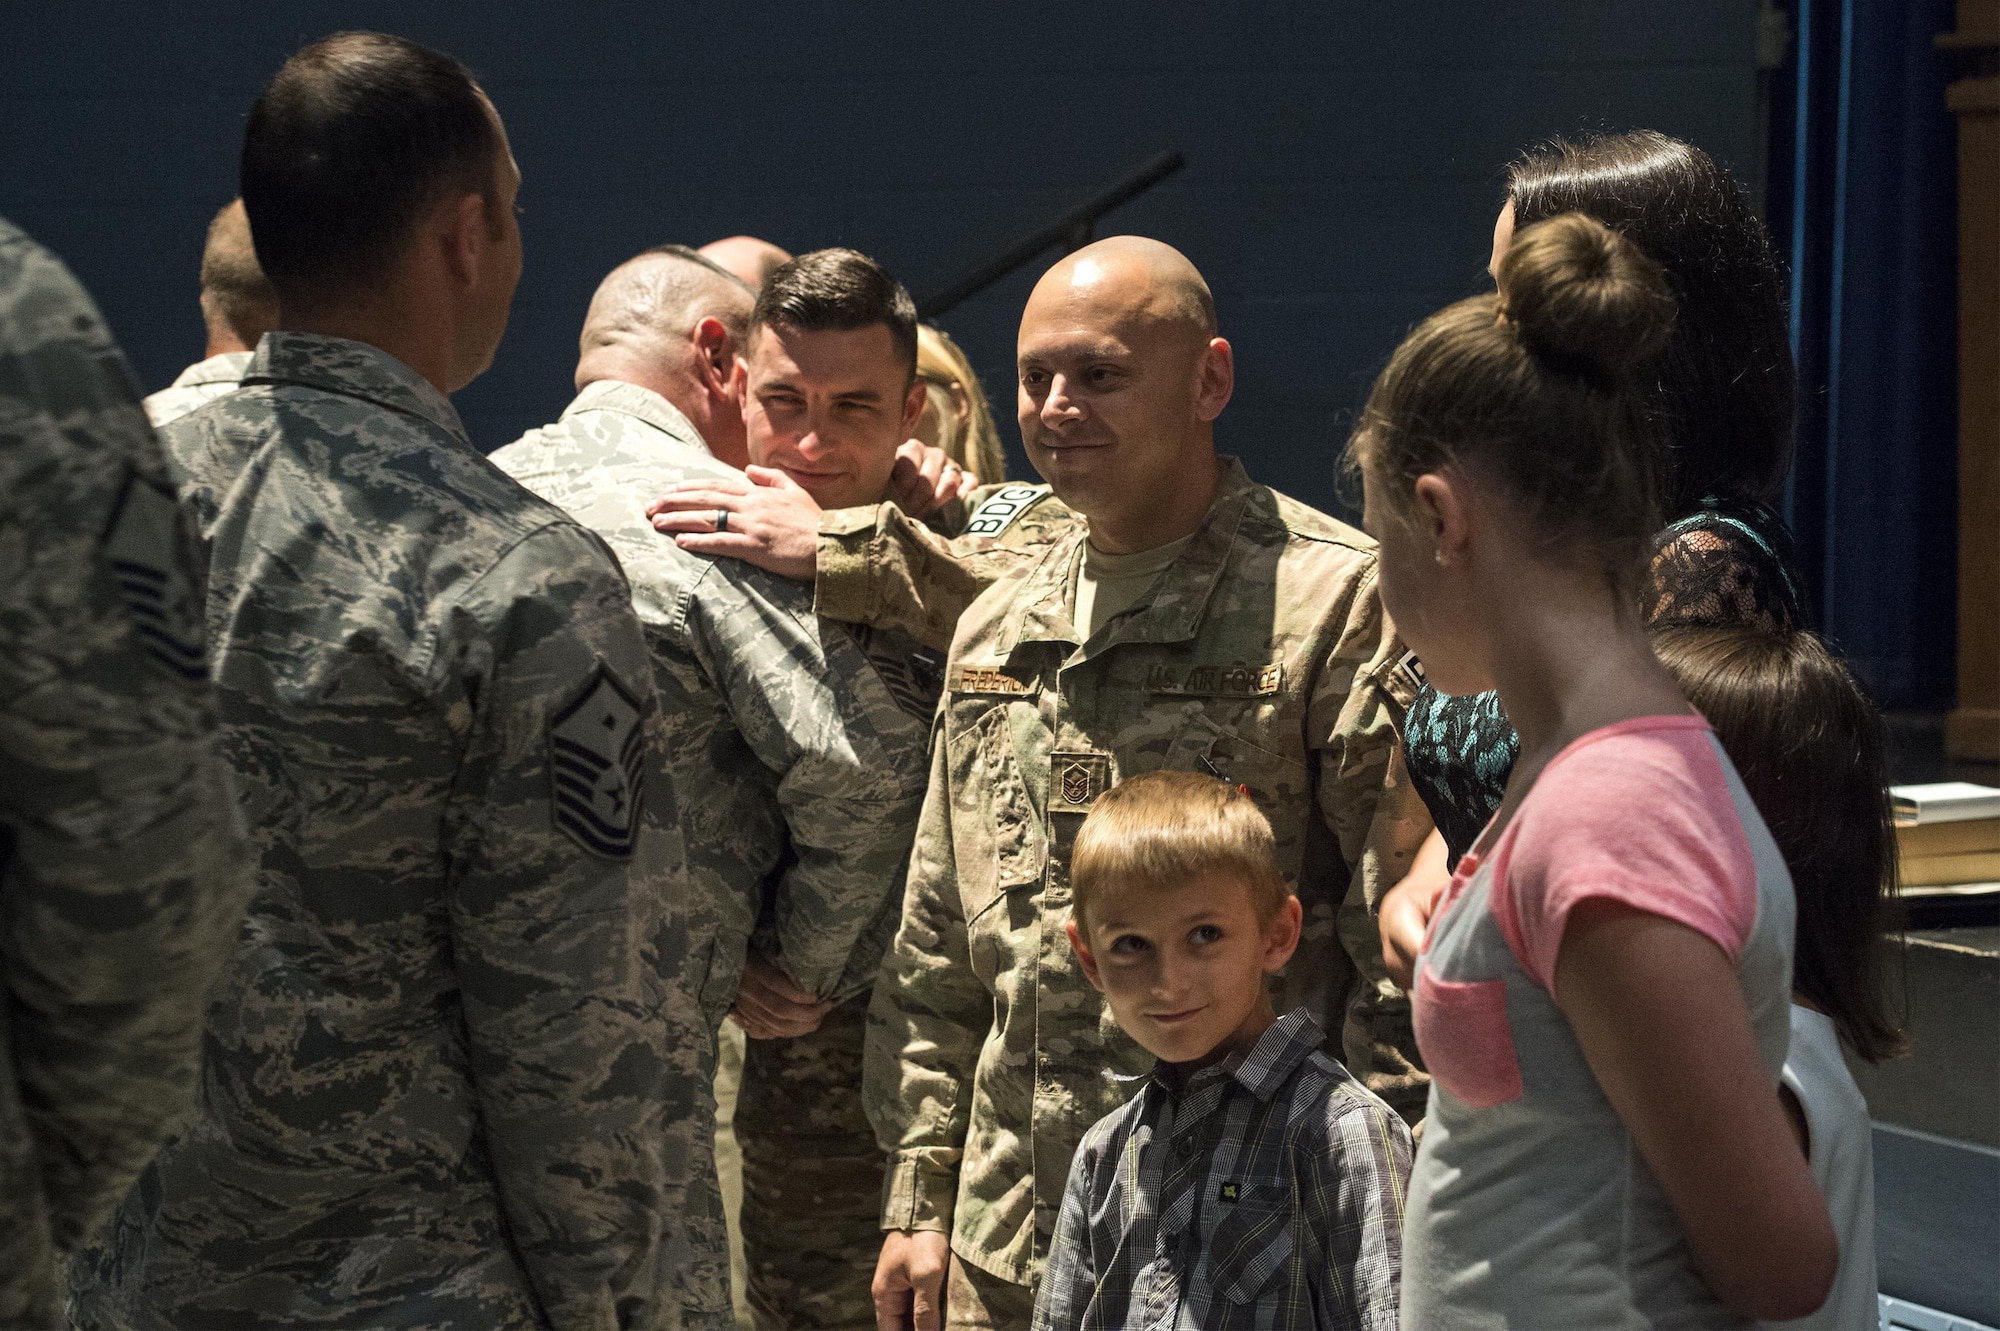 Airmen from the 820th Base Defense Group embrace Master Sgt. Aaron Frederick, 93d Air Ground Operations Wing command chief executive assistant, and Staff Sgt. Bradley Mock 824 Base Defense Squadron superintendent of supply, for their heroic actions after a medallion ceremony, July 8, 2016, at Moody Air Force Base, Ga. Both Frederick and Mock earned an Air Force Combat Action Medal, which is awarded to Airmen who have been under direct and hostile fire while operating outside the defended perimeter or physically engaging hostile forces with direct and lethal fire. (U.S. Air Force photo by Airman 1st Class Janiqua P. Robinson/Released)